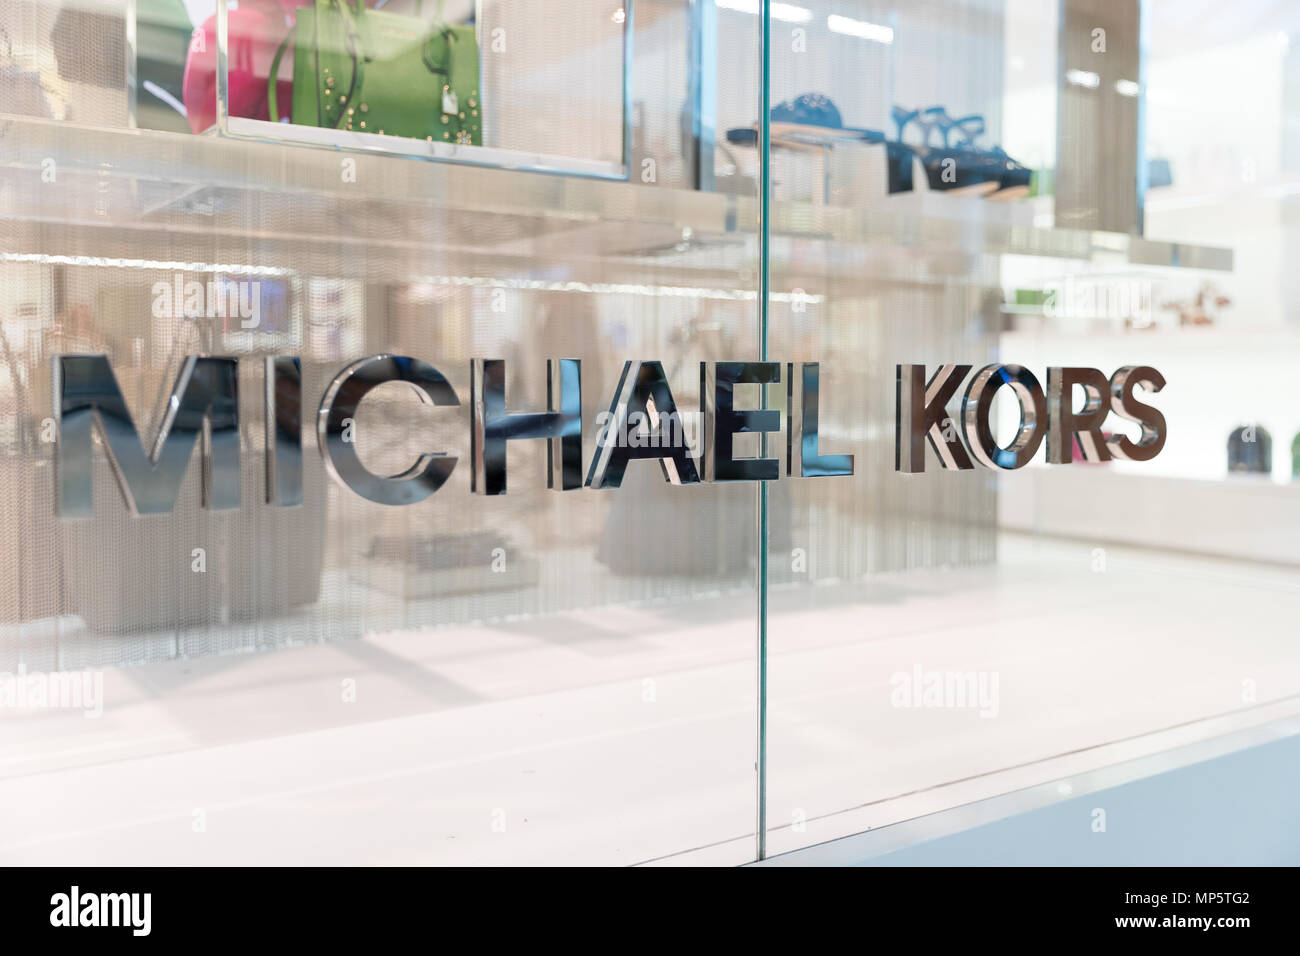 Philadelphia, Pennsylvania, May 19 2018: An exterior view of the Michael Kors store in shopping mall. Michael Kors is an American luxury fashion compa Stock Photo